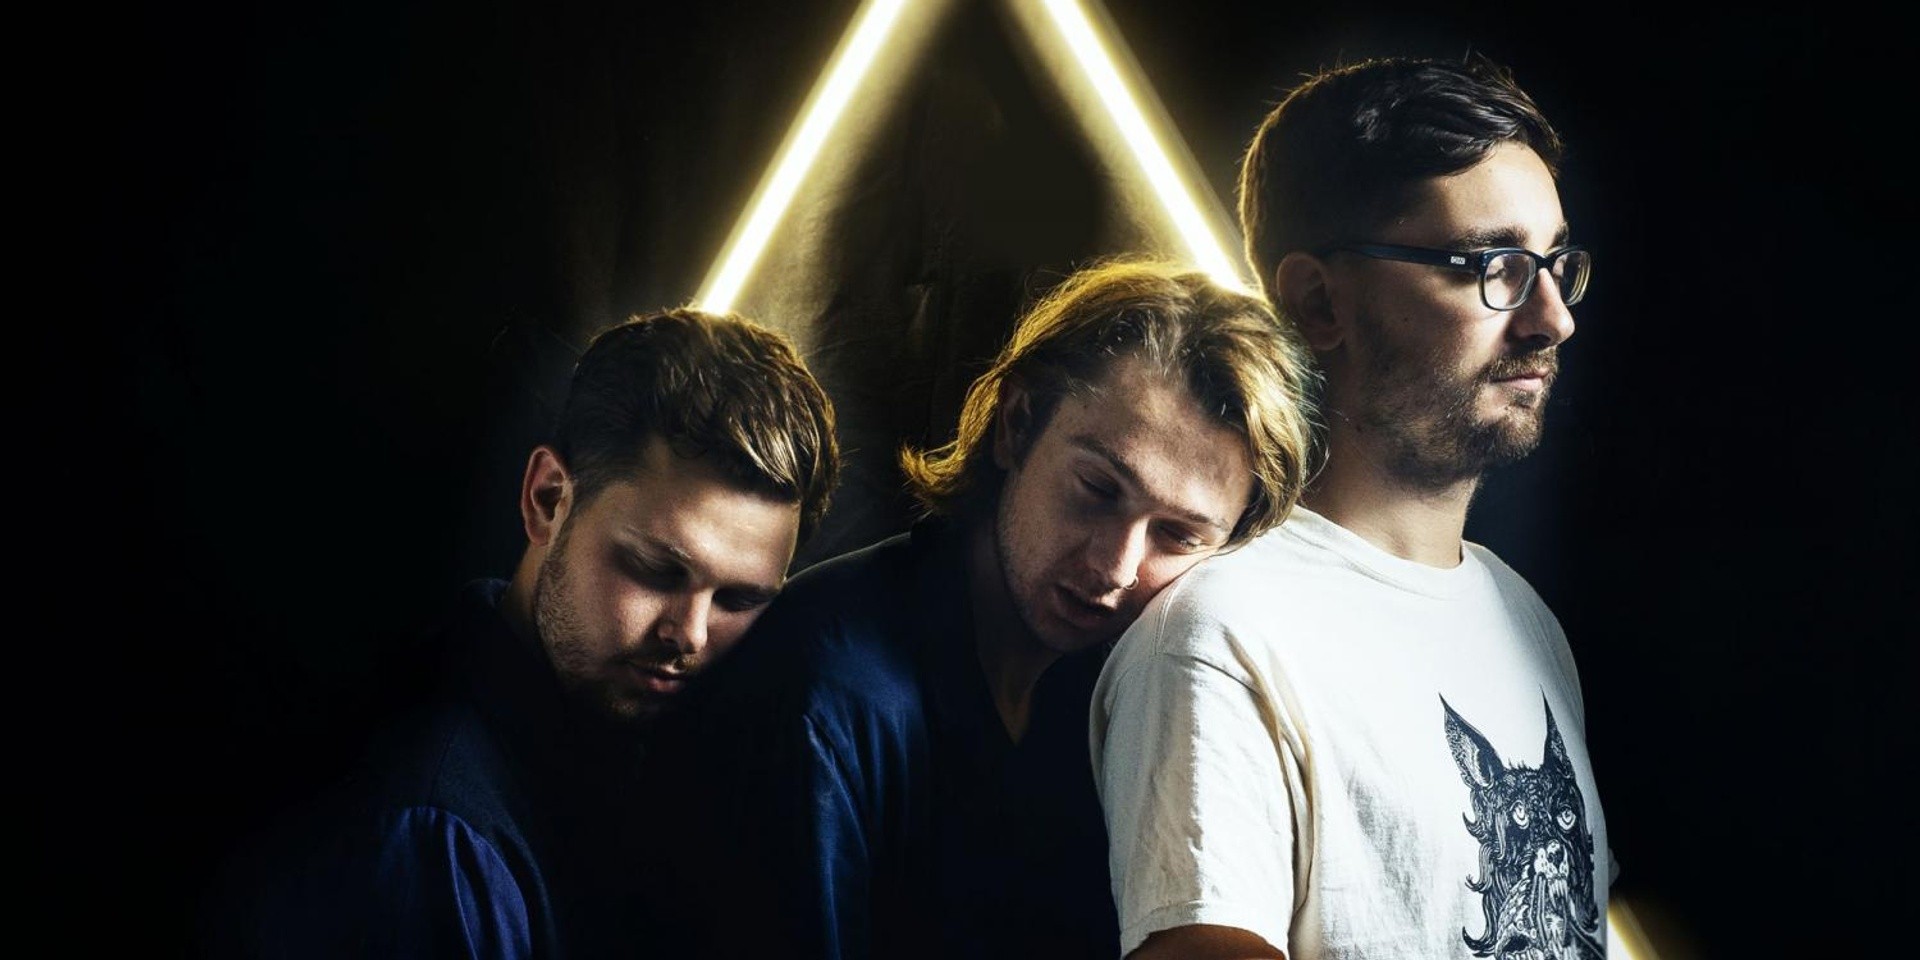 Alt-J: "We always try things when someone has an idea, even if we doubt it’ll work"